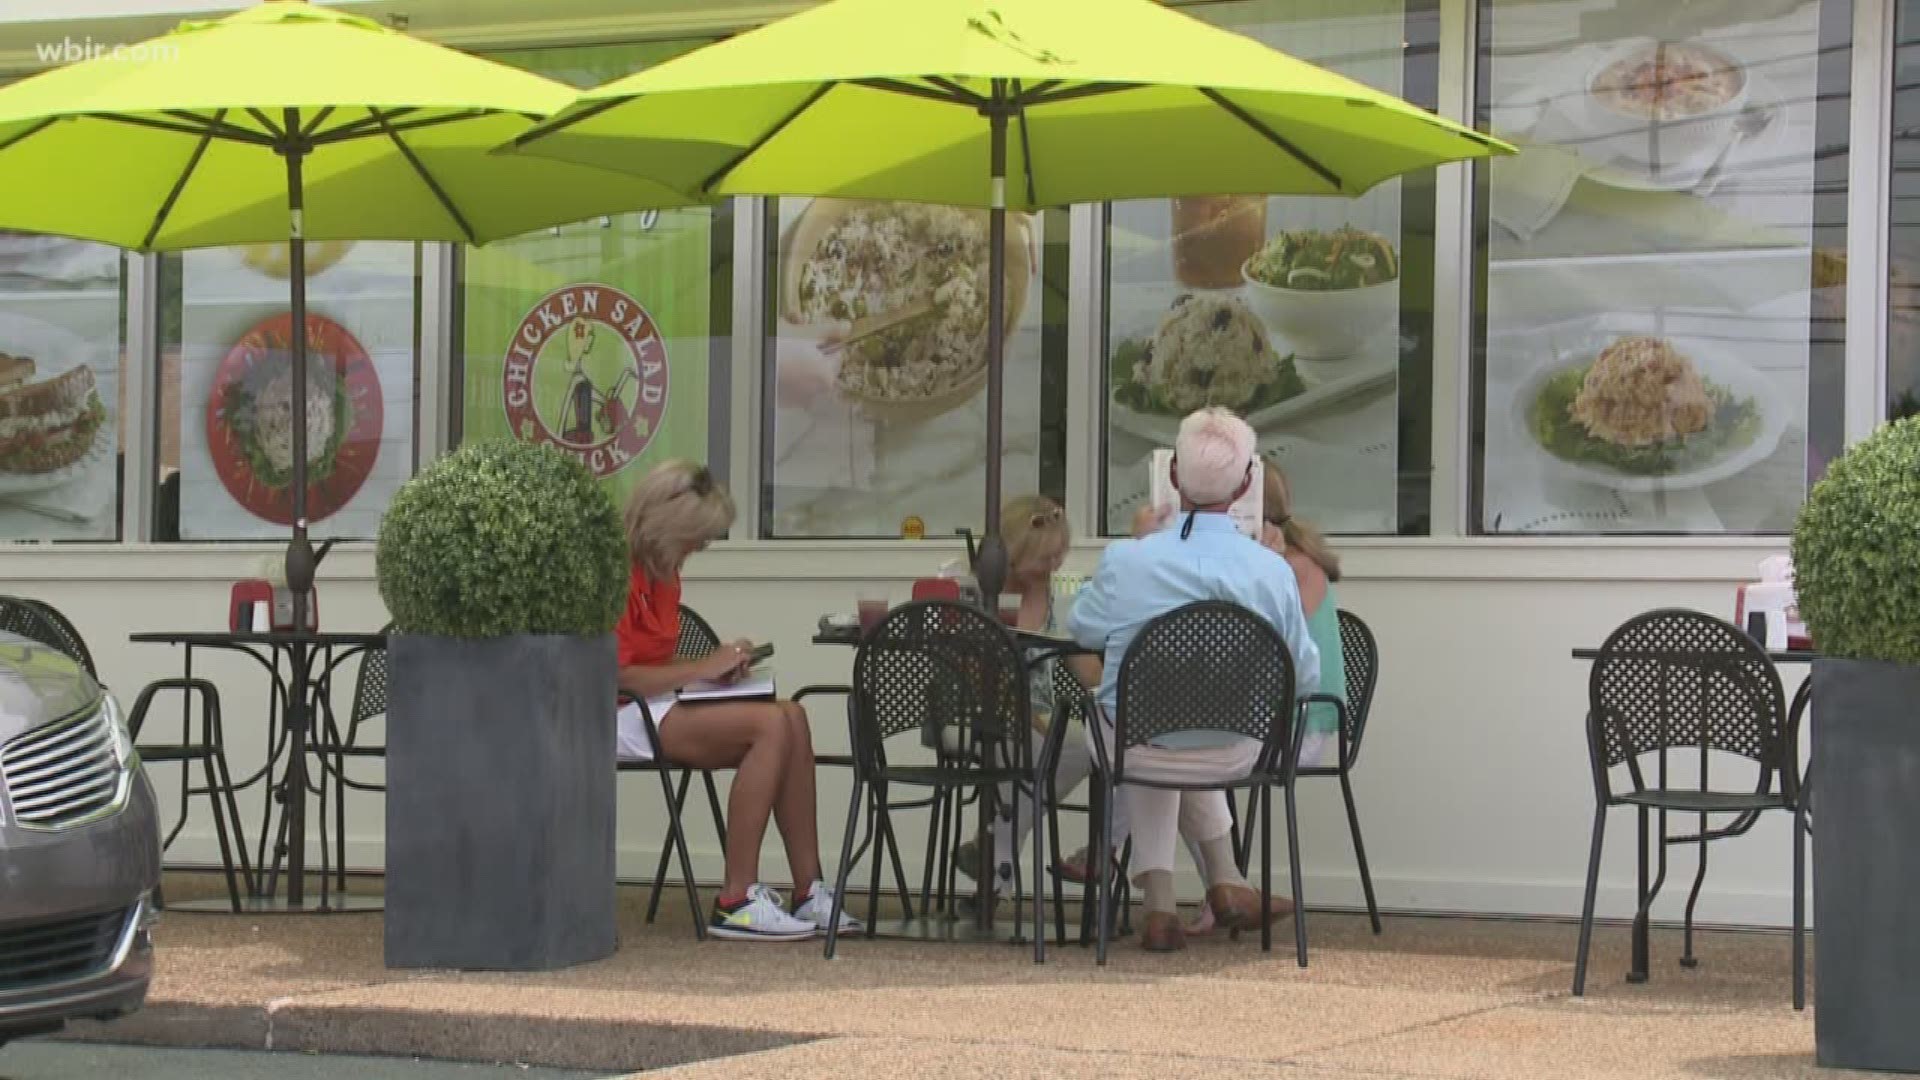 The restaurant, located at 8008 Kingston Pike in the Bearden area, has a dozen varieties of, of course, chicken salad on the menu.